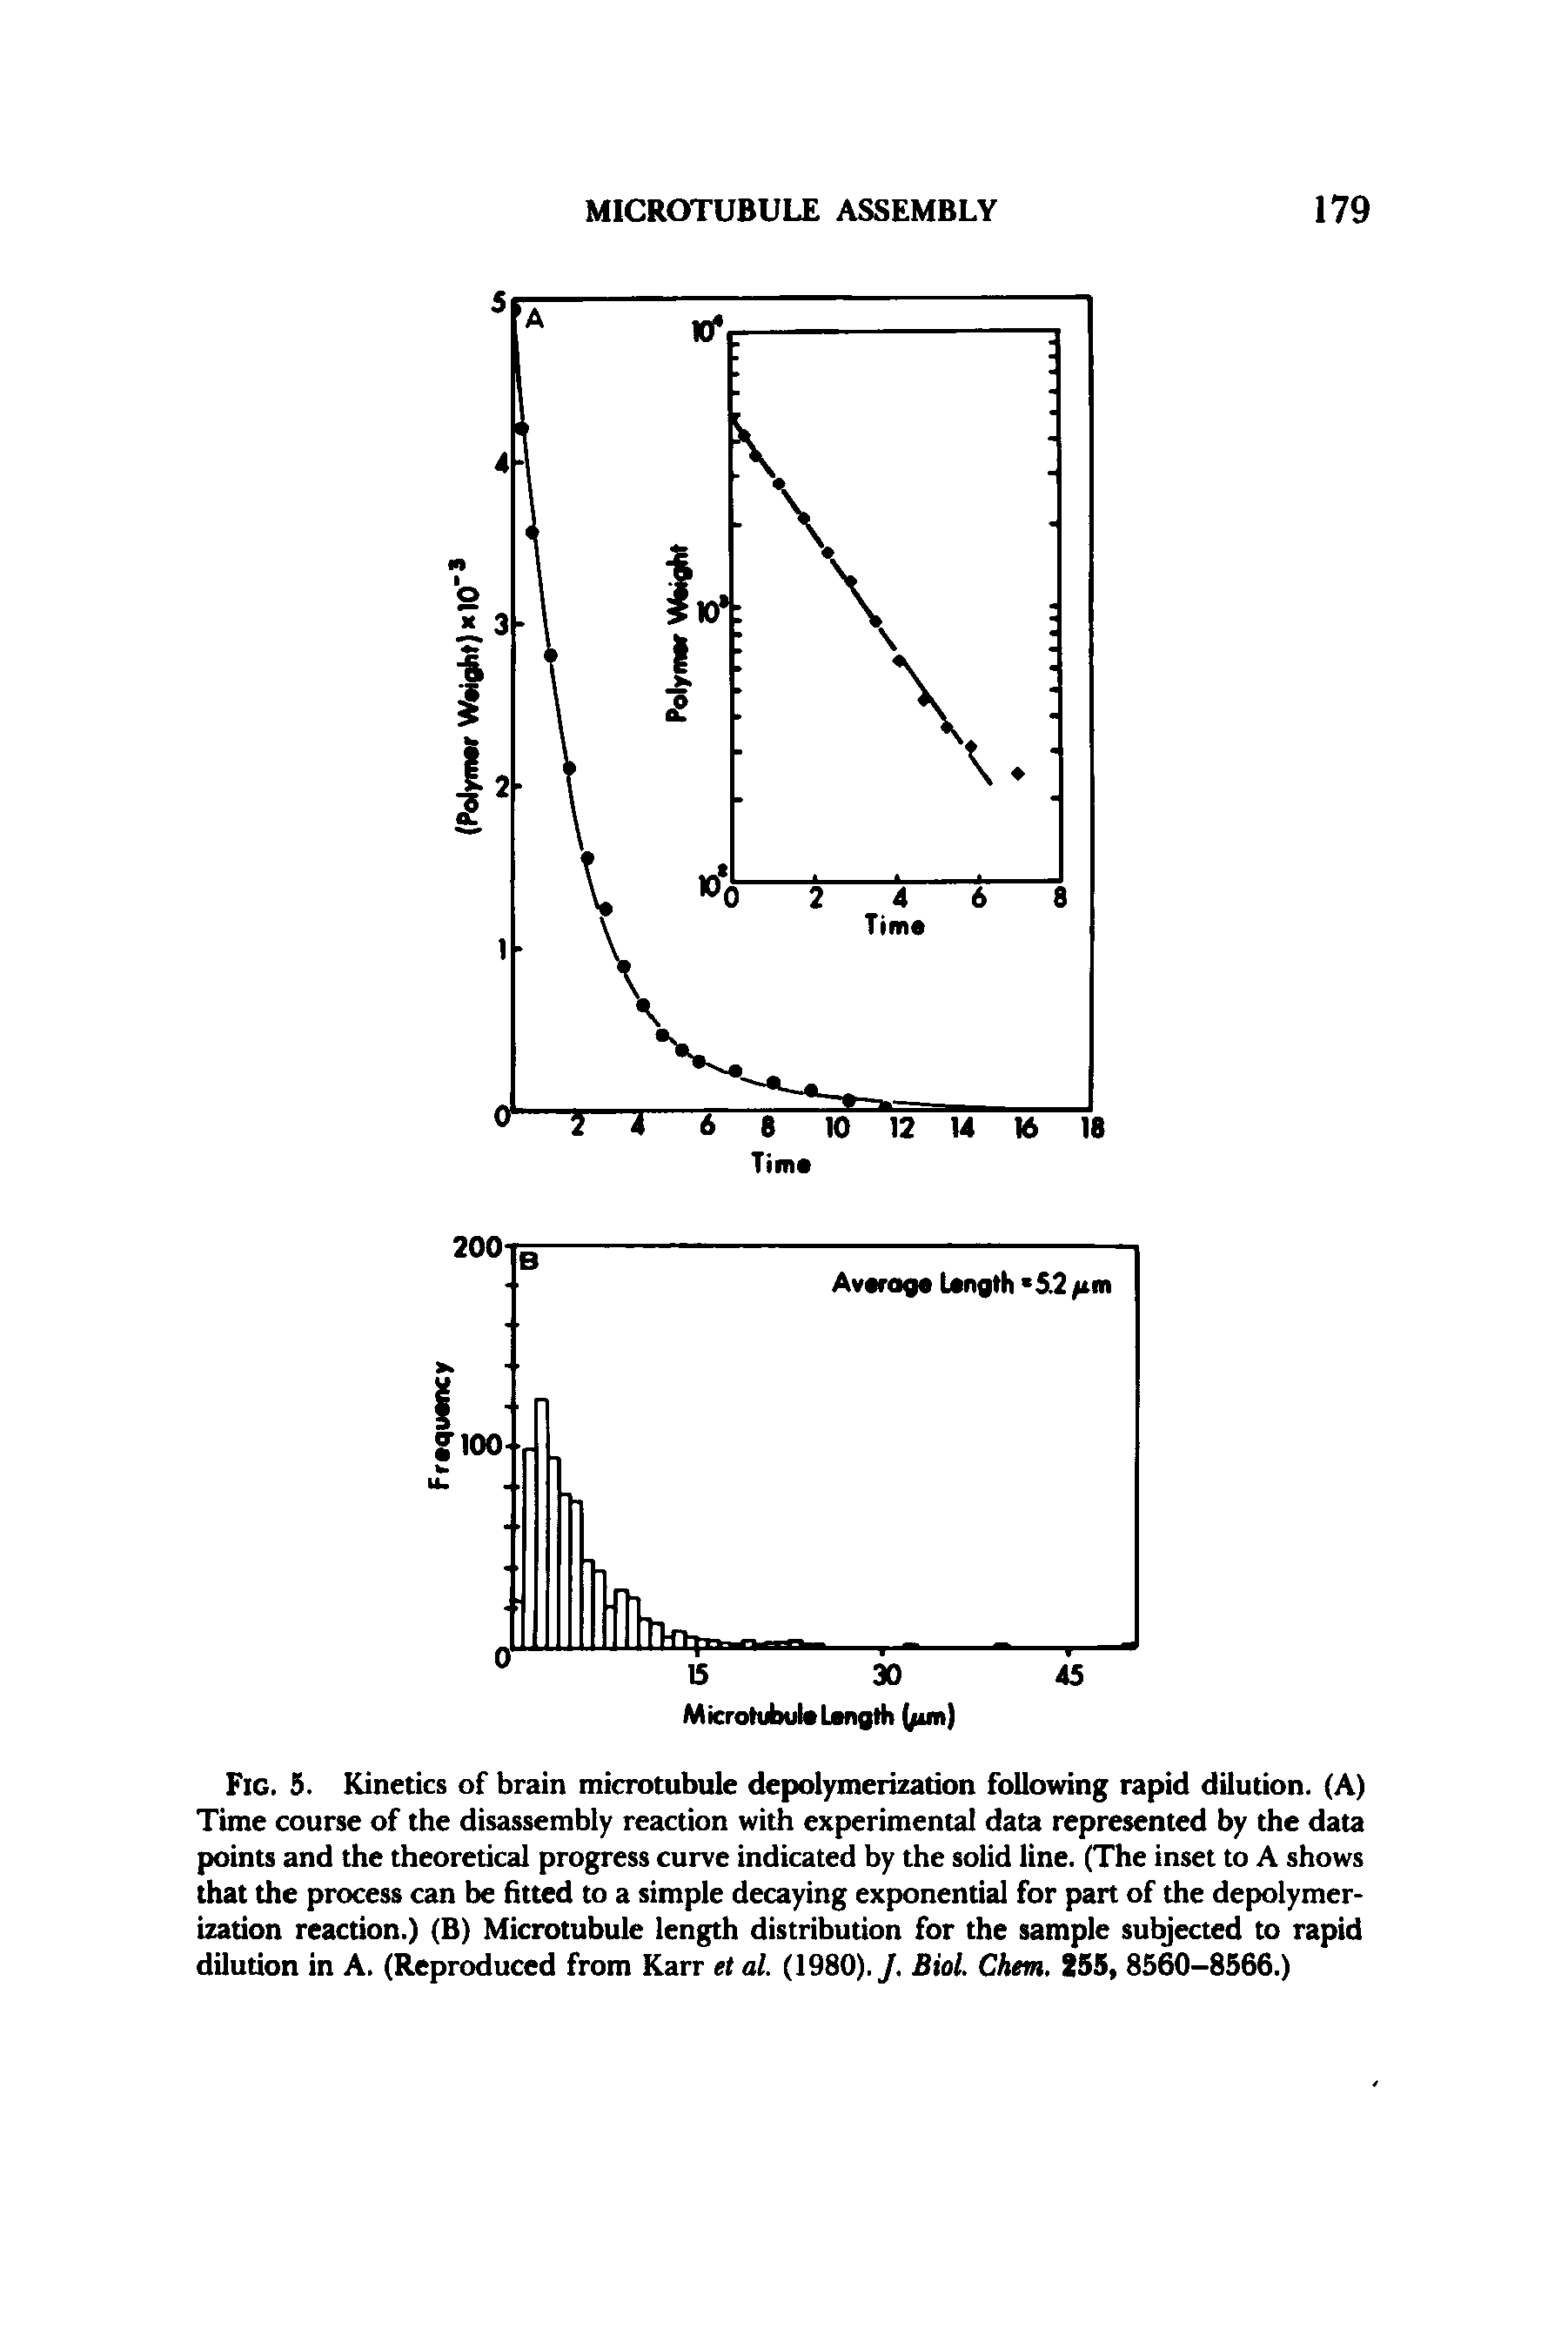 Fig. 5. Kinetics of brain microtubule depolymerization following rapid dilution. (A) Time course of the disassembly reaction with experimental data represented by the data points and the theoretical progress curve indicated by the solid line. (The inset to A shows that the process can be fitted to a simple decaying exponential for part of the depolymerization reaction.) (B) Microtubule length distribution for the sample subjected to rapid dilution in A. (Reproduced from Karr et al. (1980)./. Biol. Chm. 255, 8560-8566.)...